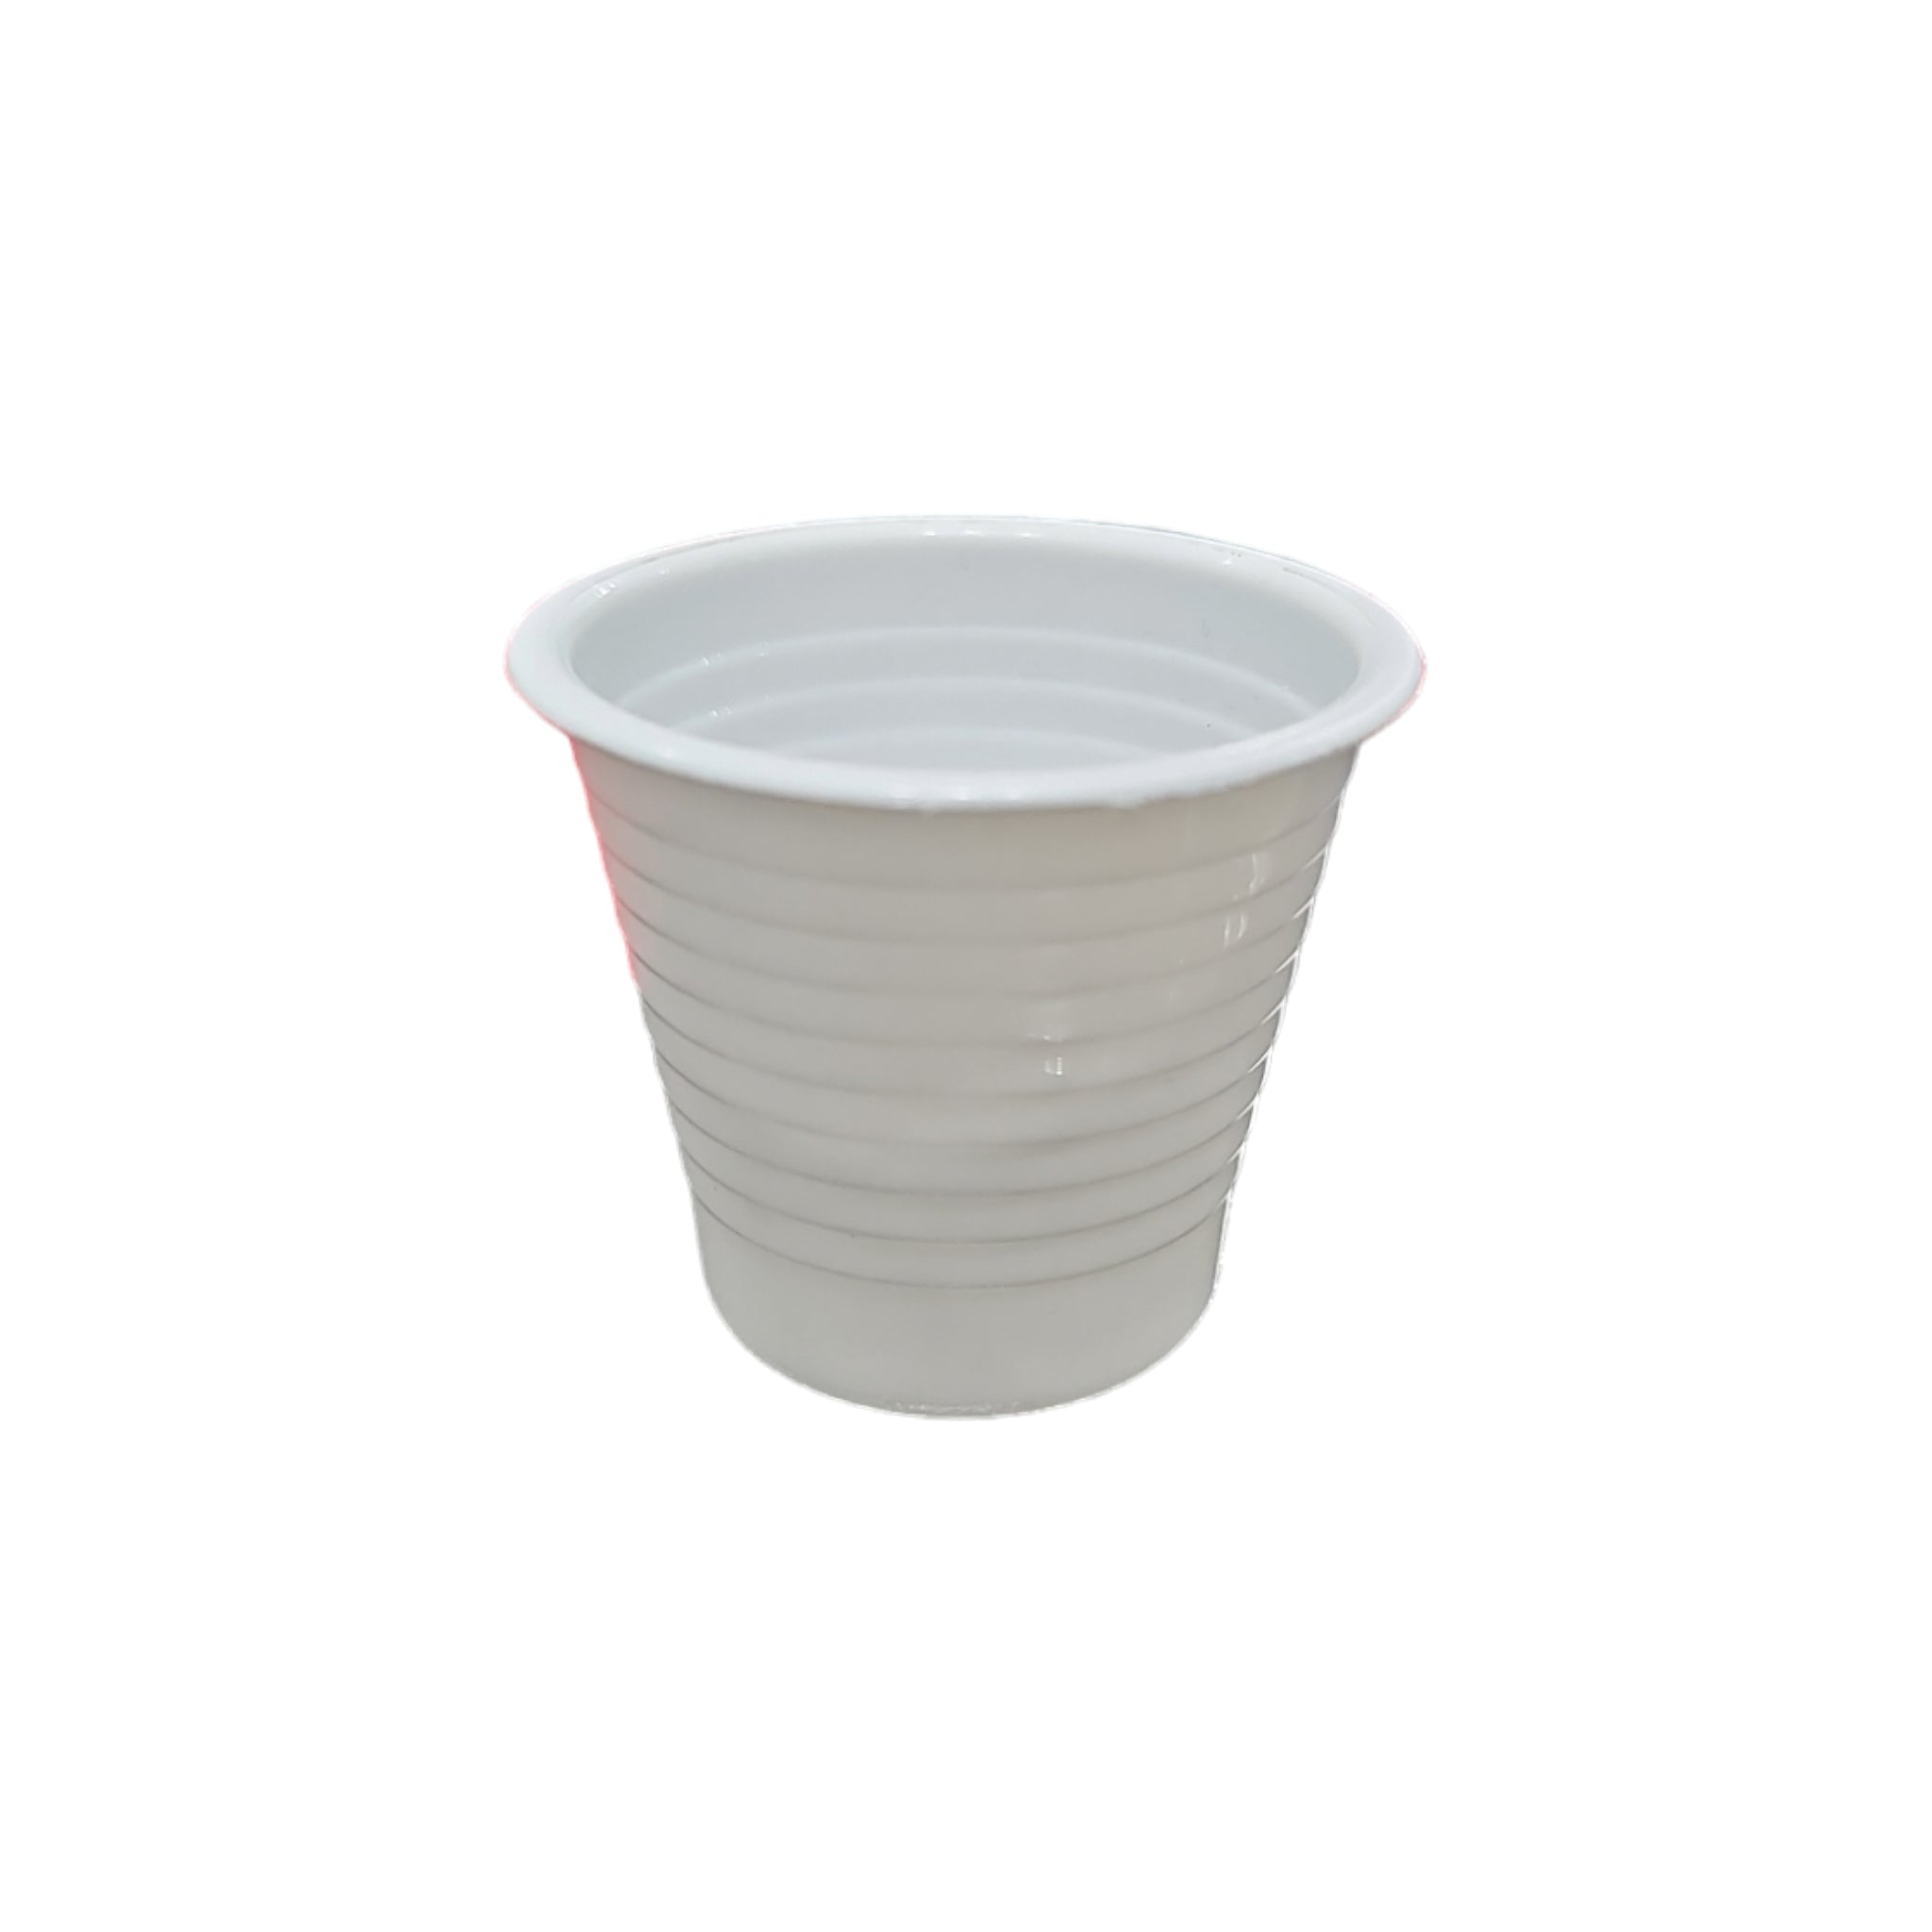 Ketchup Portion Sauce Cup White 15ml 100Pack